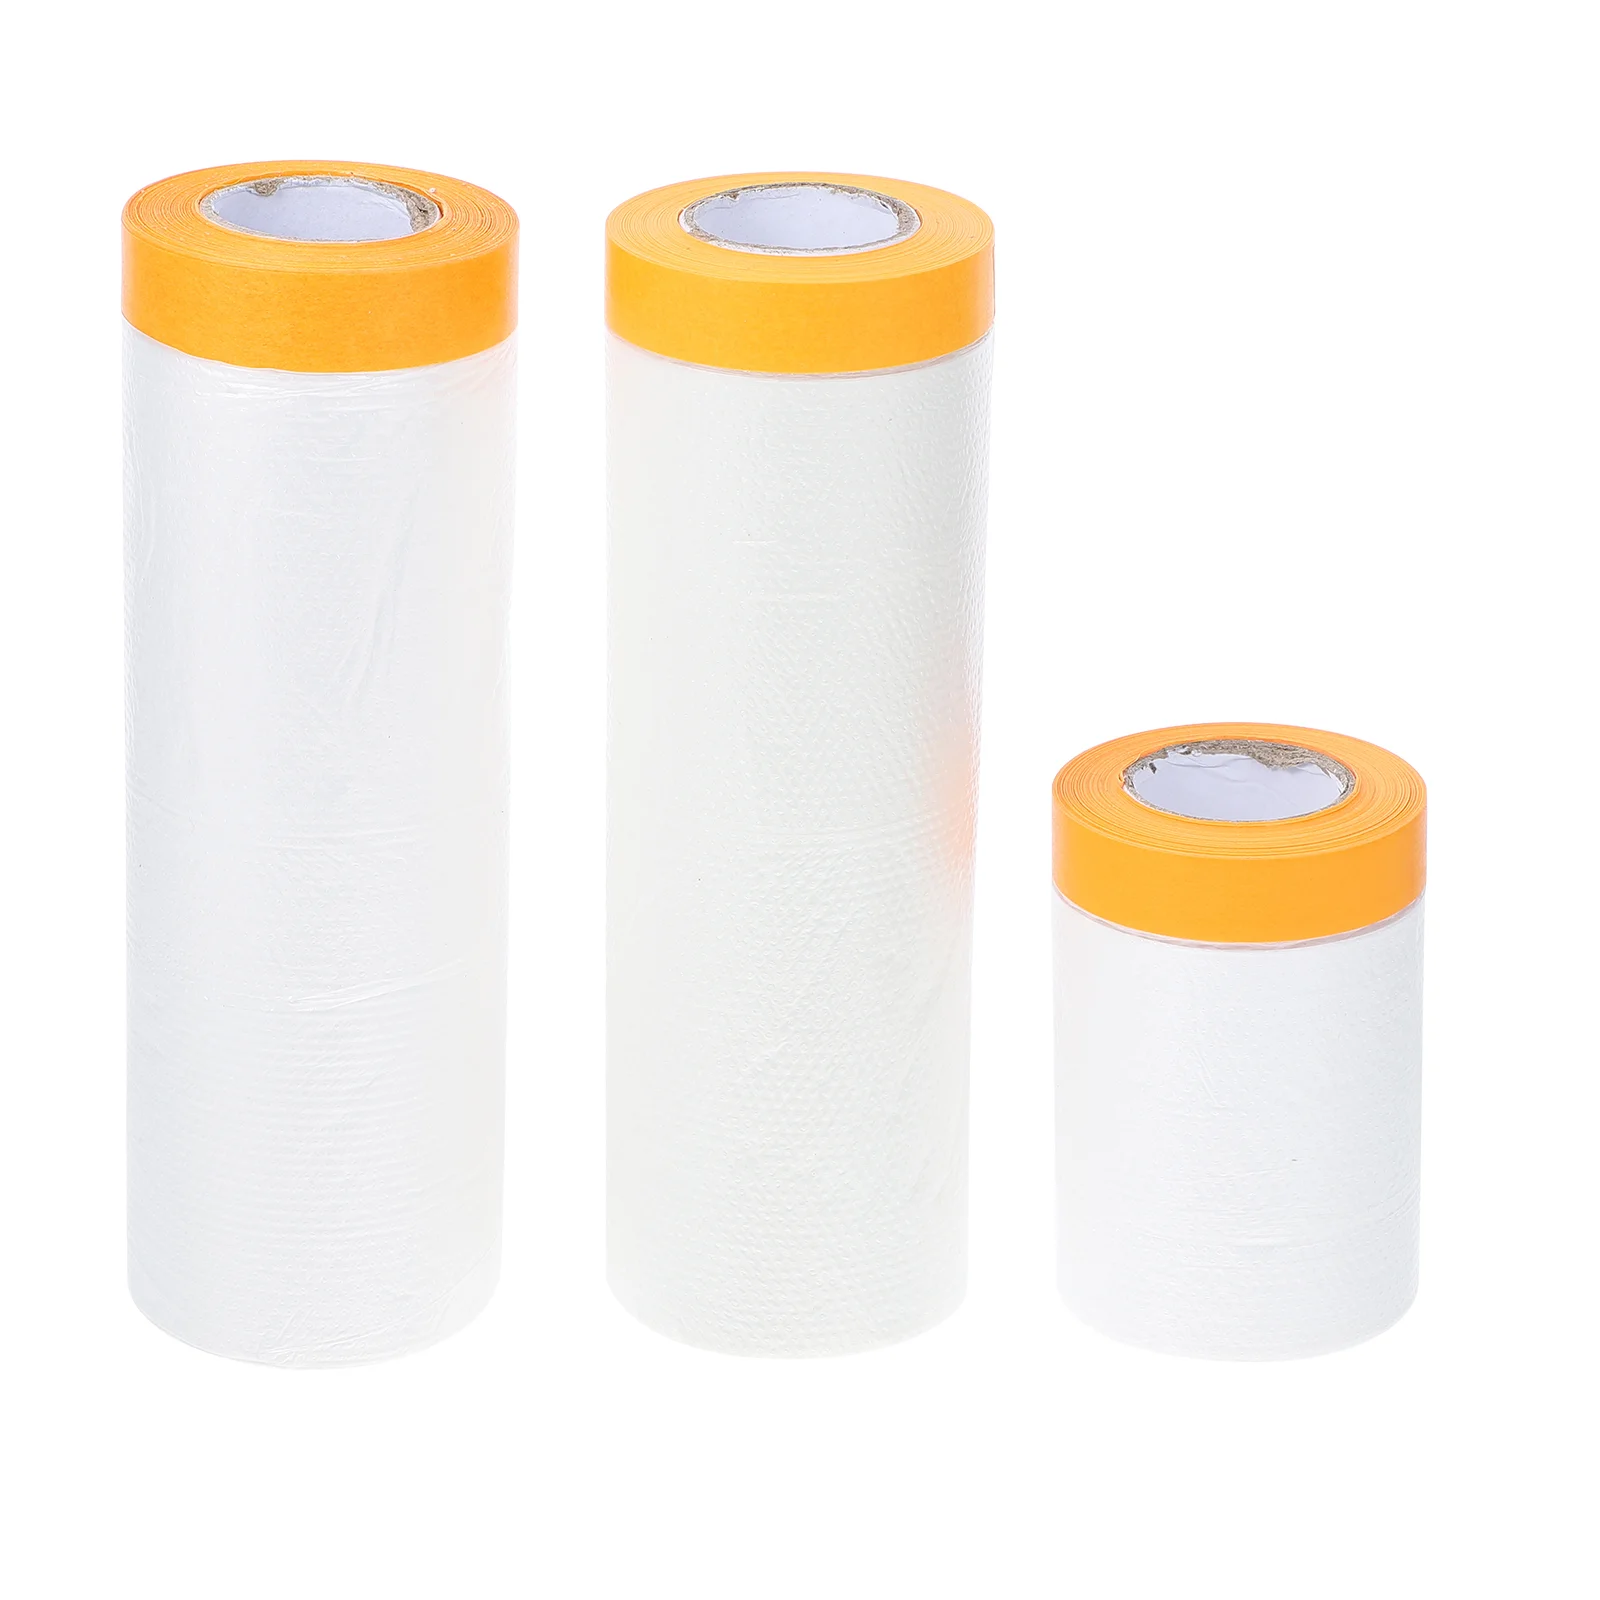 3 Rolls Car Paint Disposable Masking Paper Adhesive PVC Making Film 20 Meters color self adhesive fastener tape 5 meters strong hooks loops cable for reusable tape cable organizer protector holder